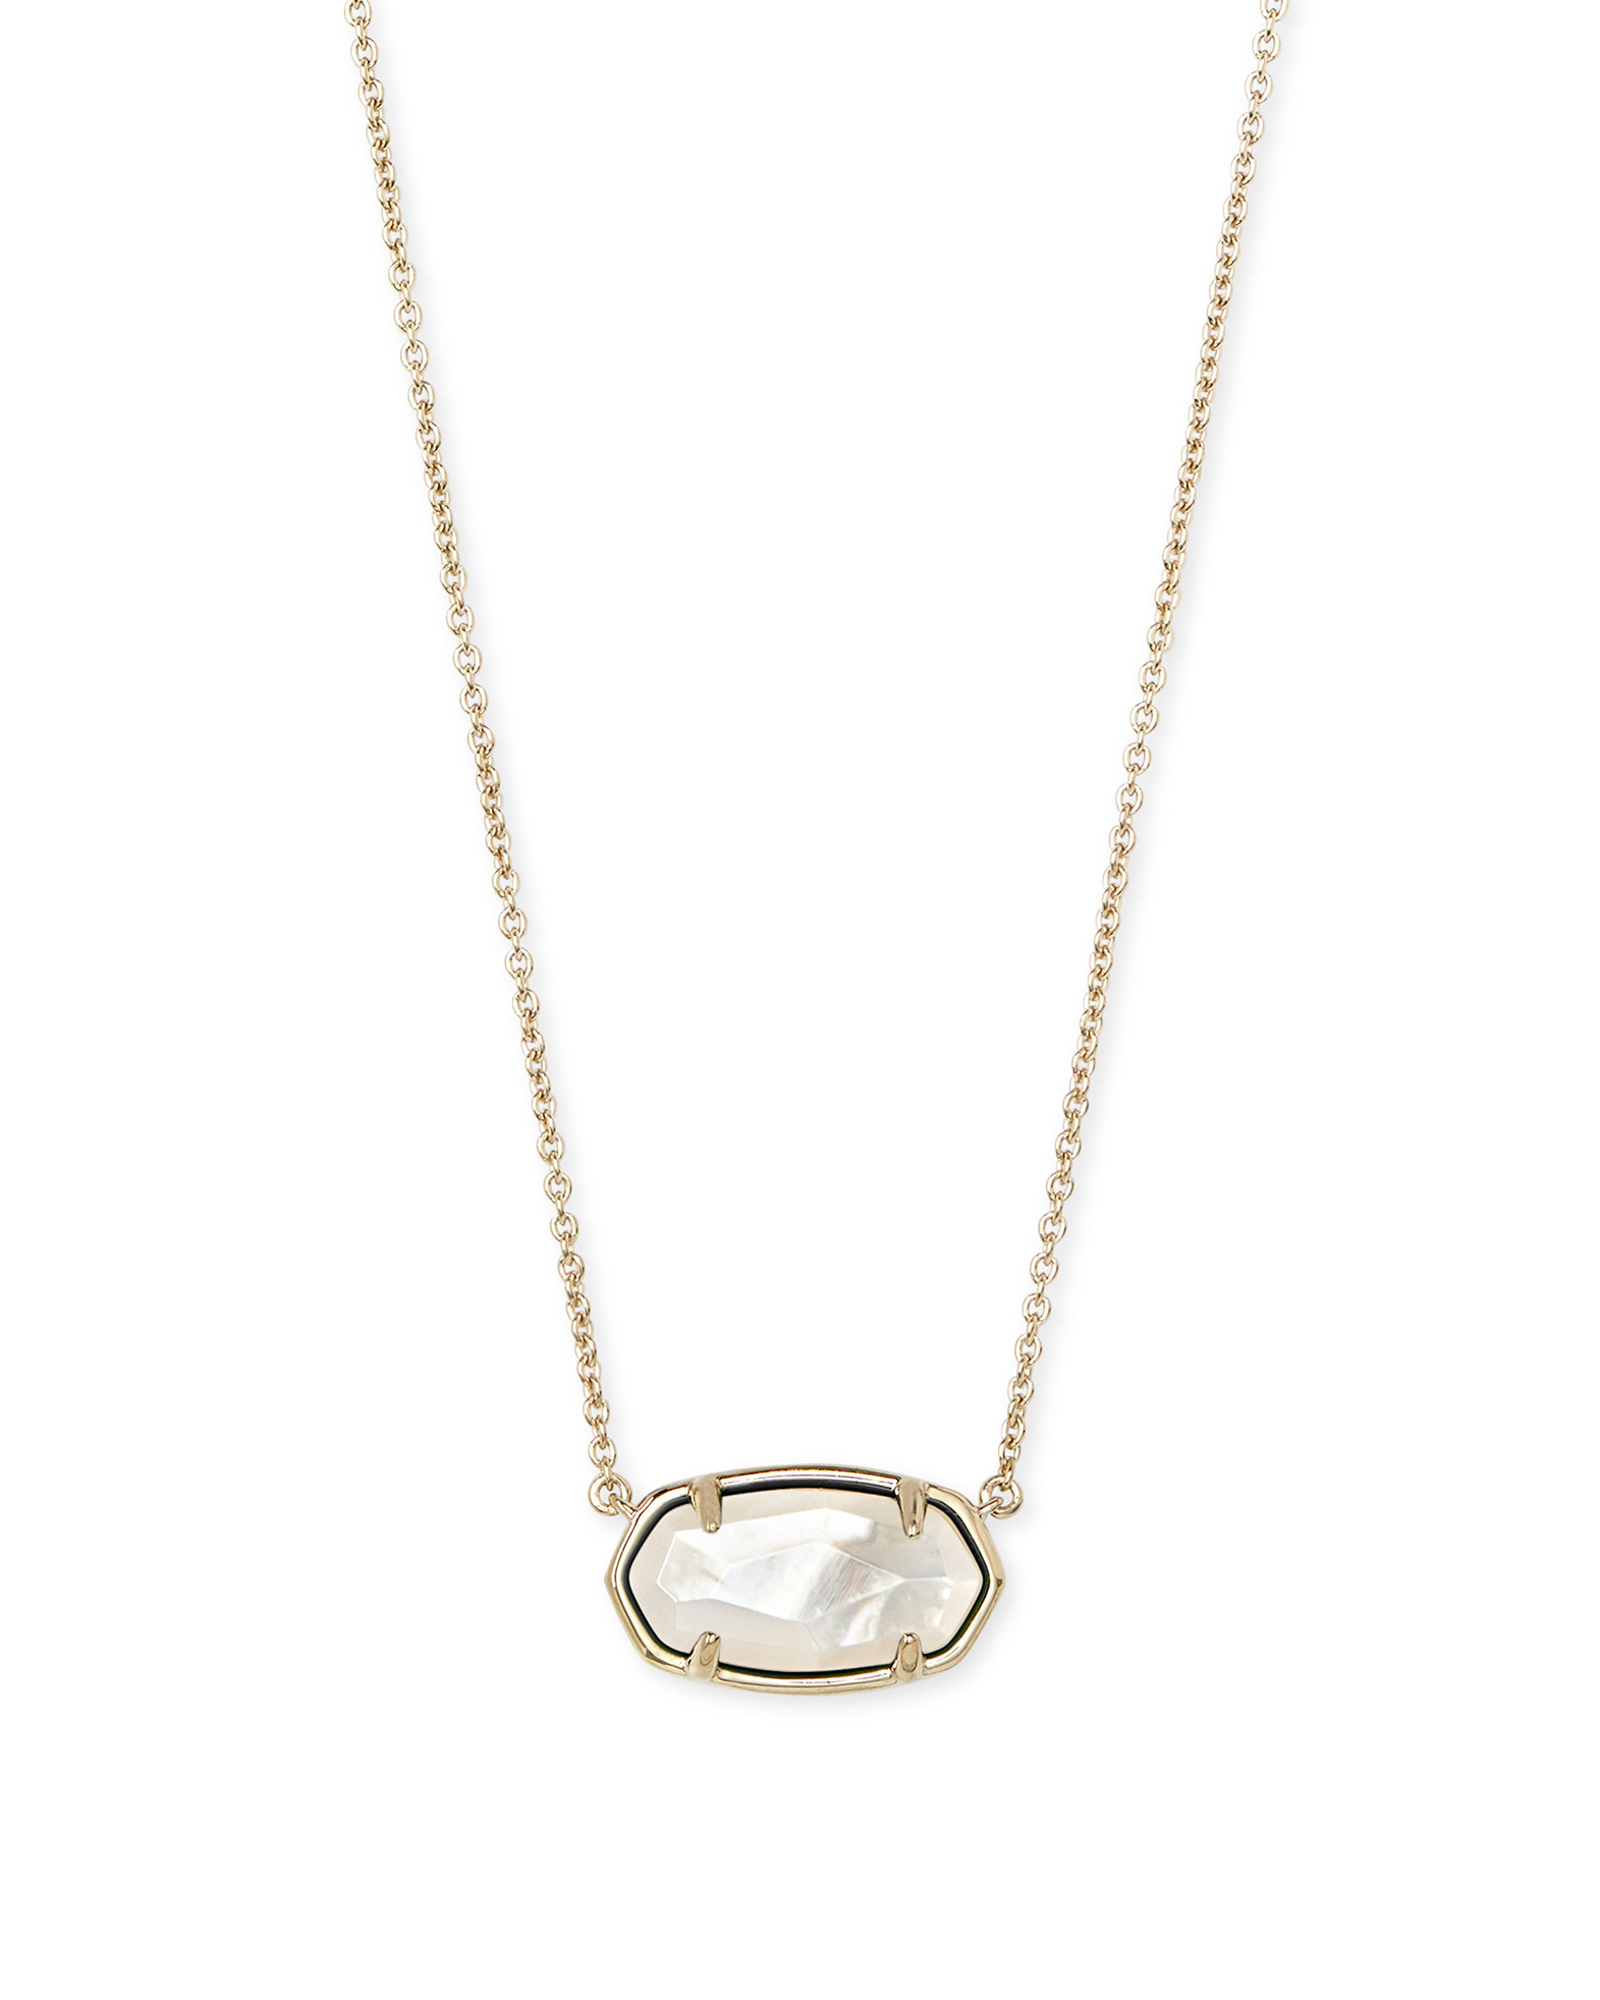 Elisa 18k Gold Vermeil Pendant Necklace in Ivory Mother-of-Pearl